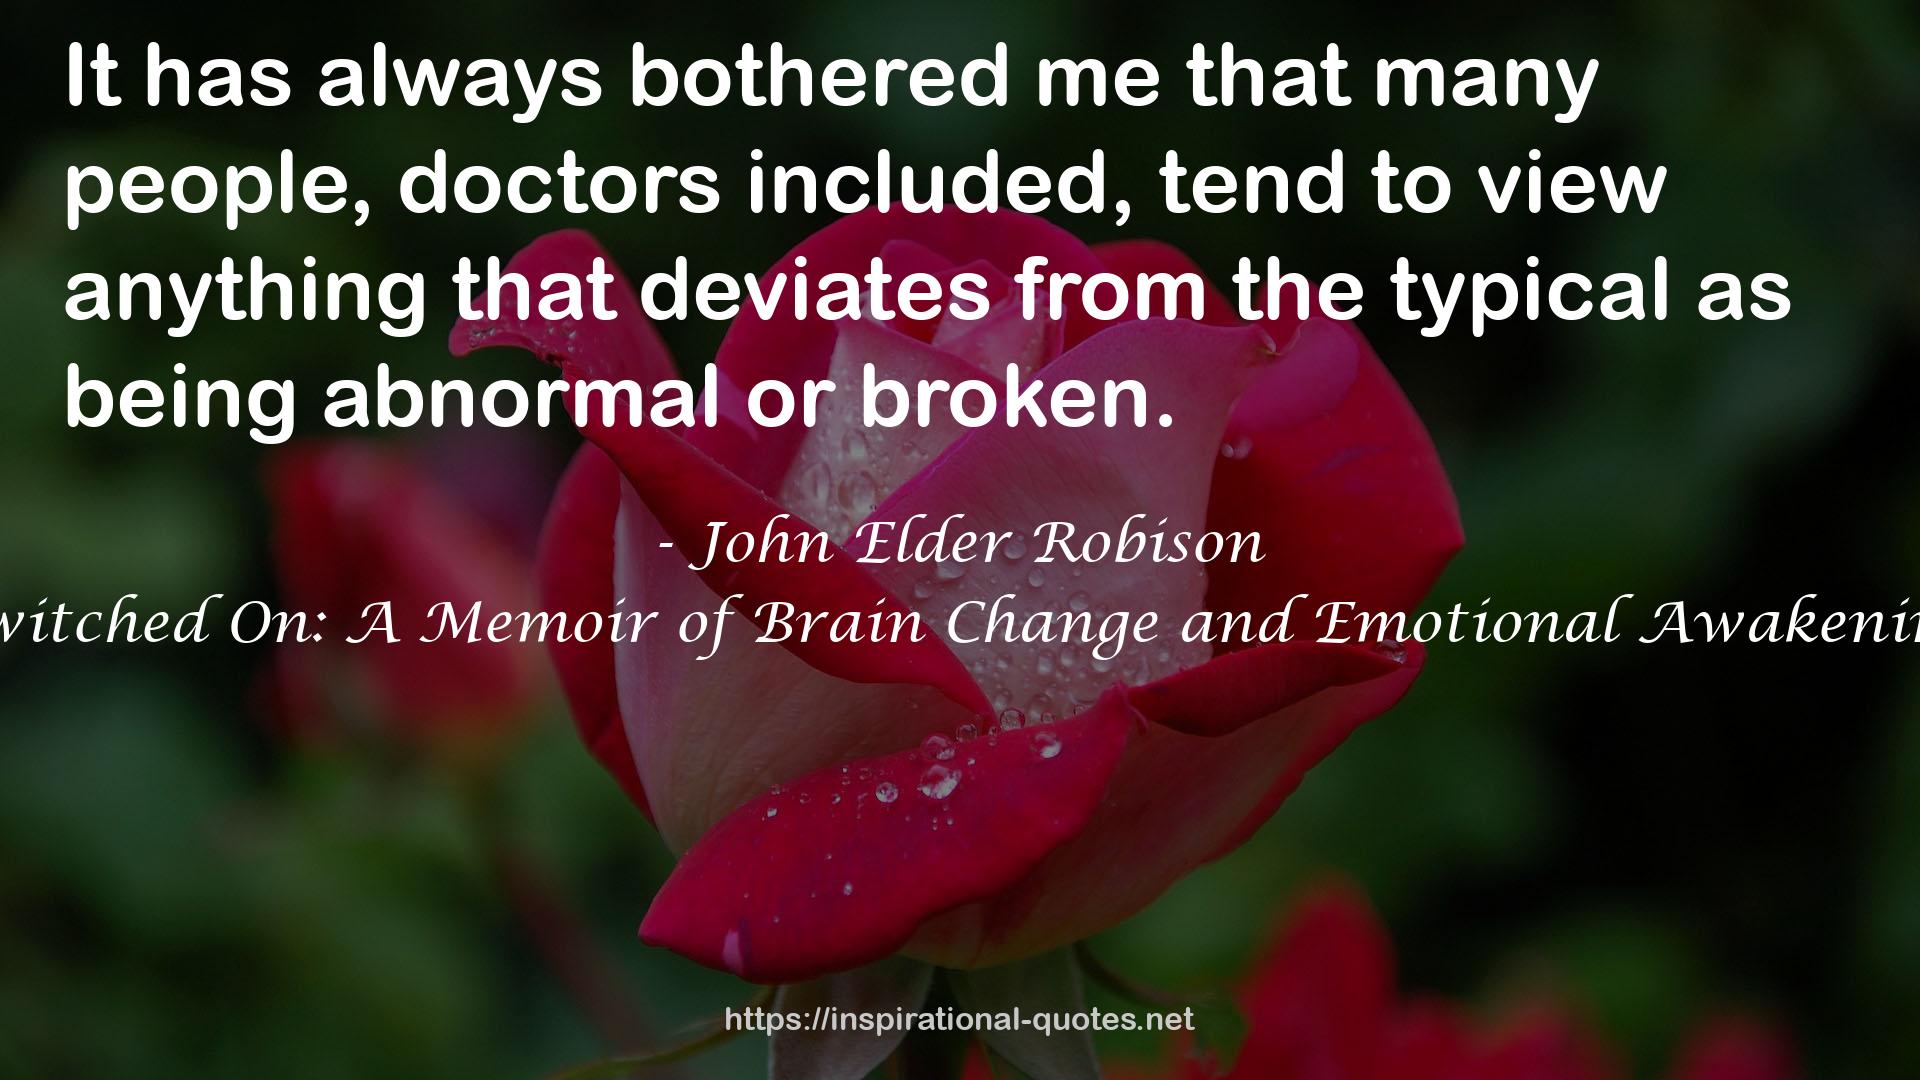 Switched On: A Memoir of Brain Change and Emotional Awakening QUOTES